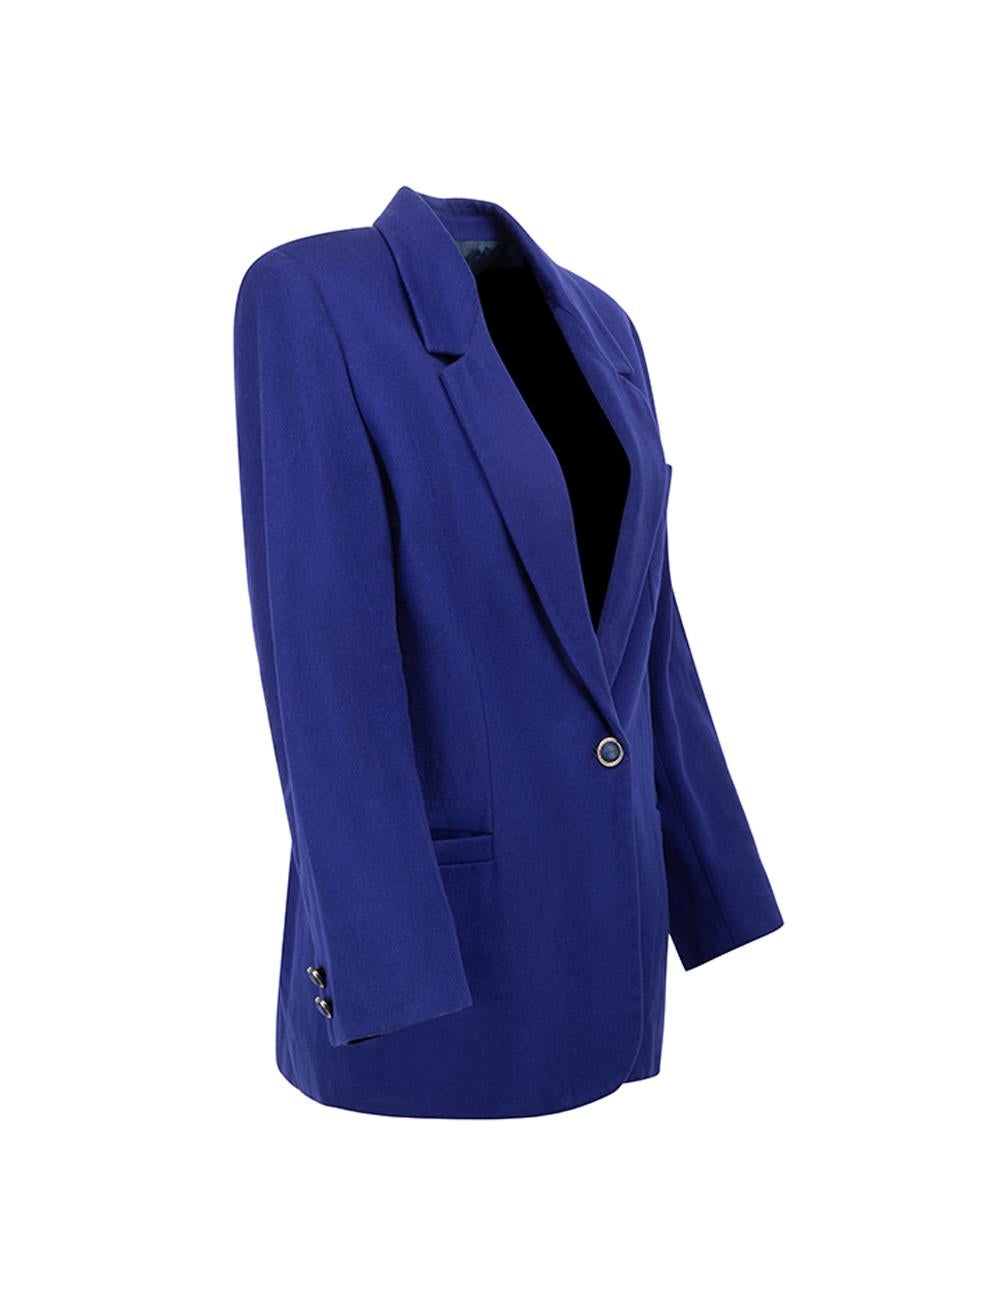 CONDITION is Very good. Minimal wear to the blazer is evident. Minimal wear to both cuffs with bobbling on this used Versus Versace designer resale item. Please note that this item is missing a brand label.



Details


Electric blue

Wool

Single